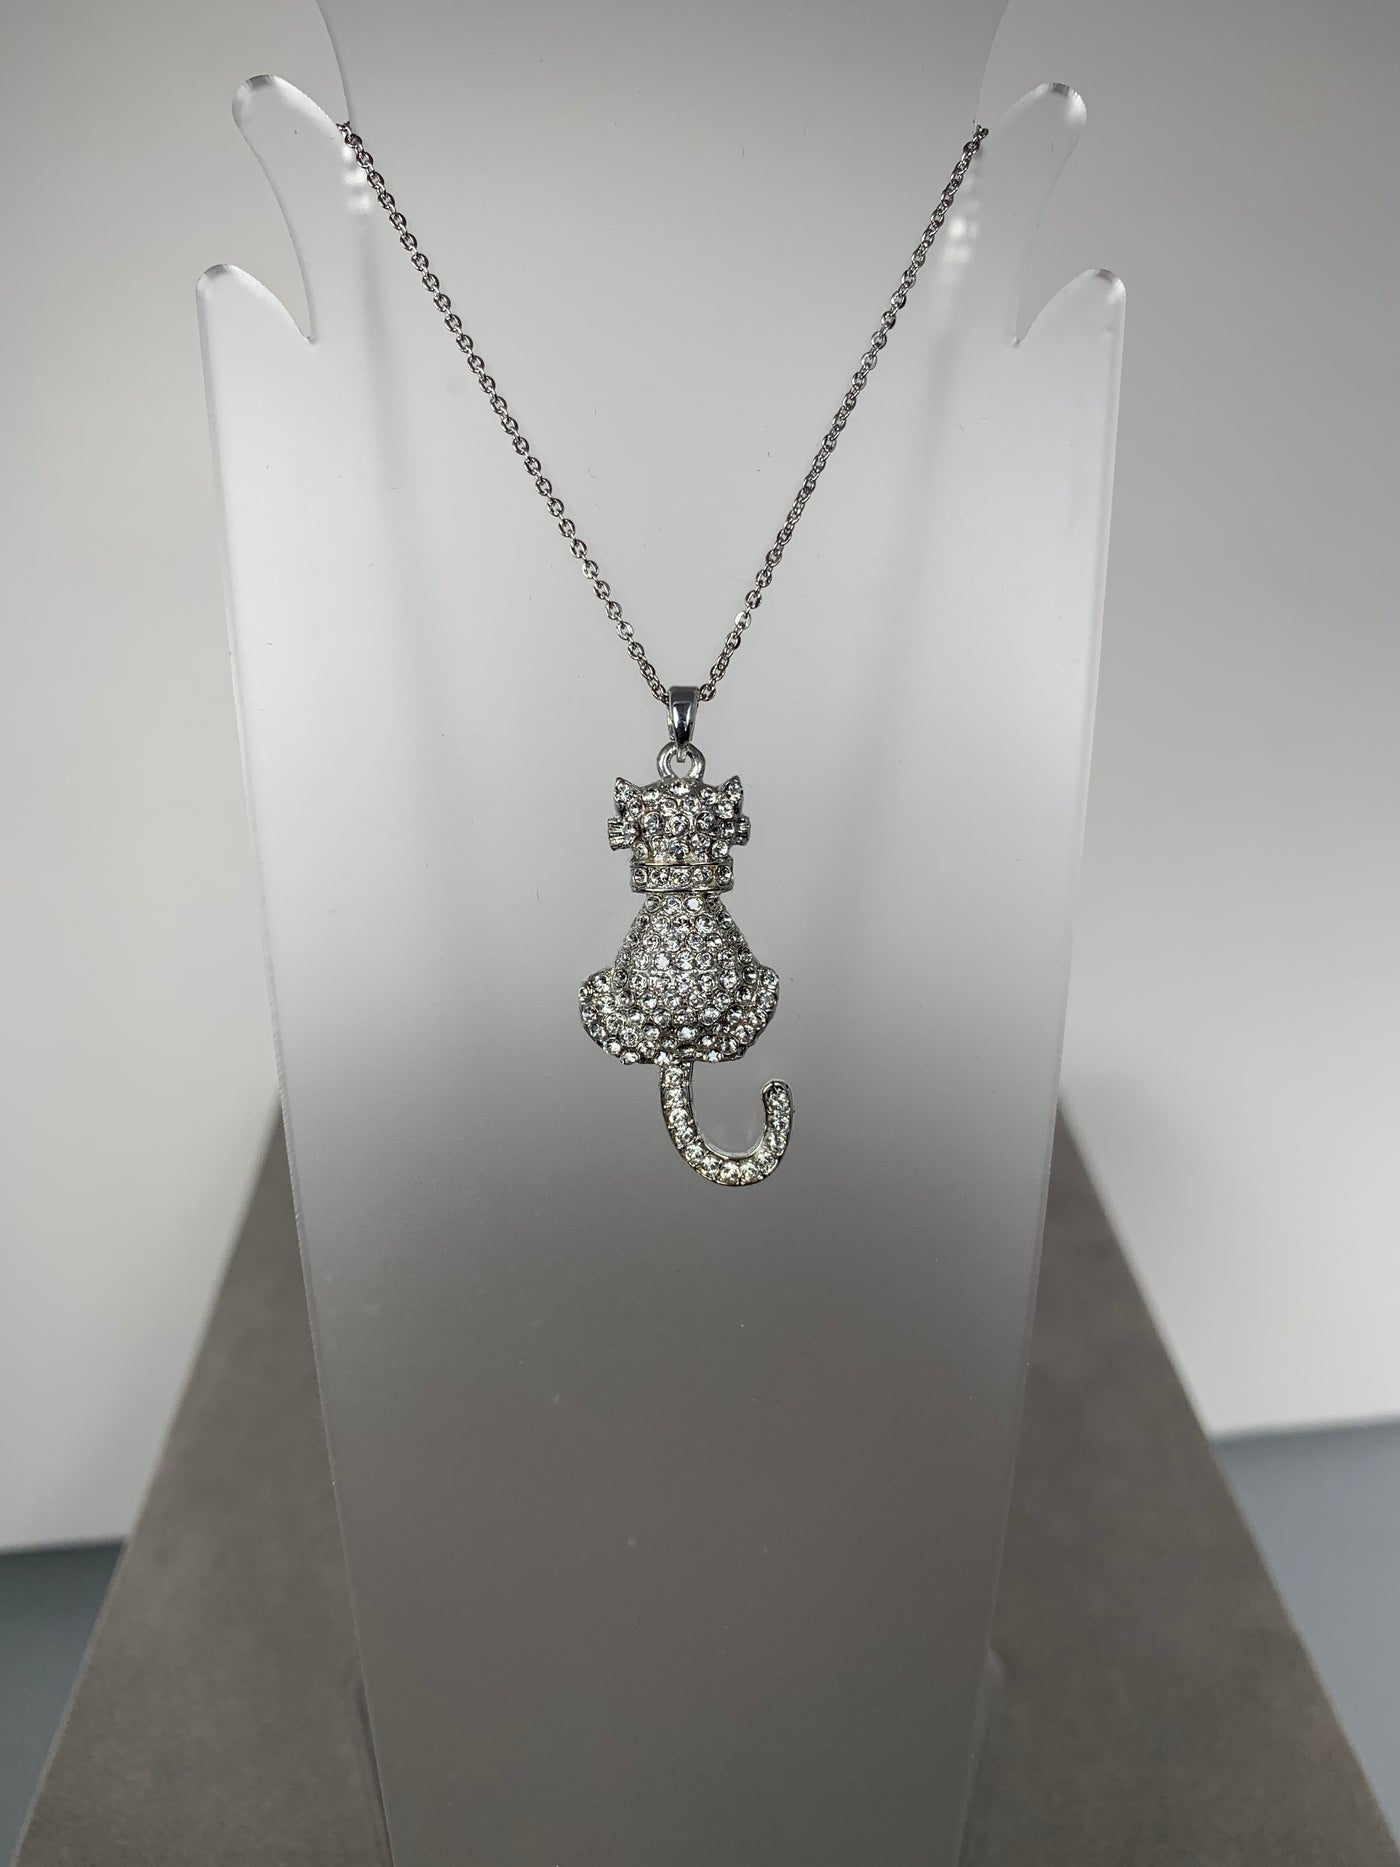 Silver Tone Crystal Kitty Cat Pendant Necklace